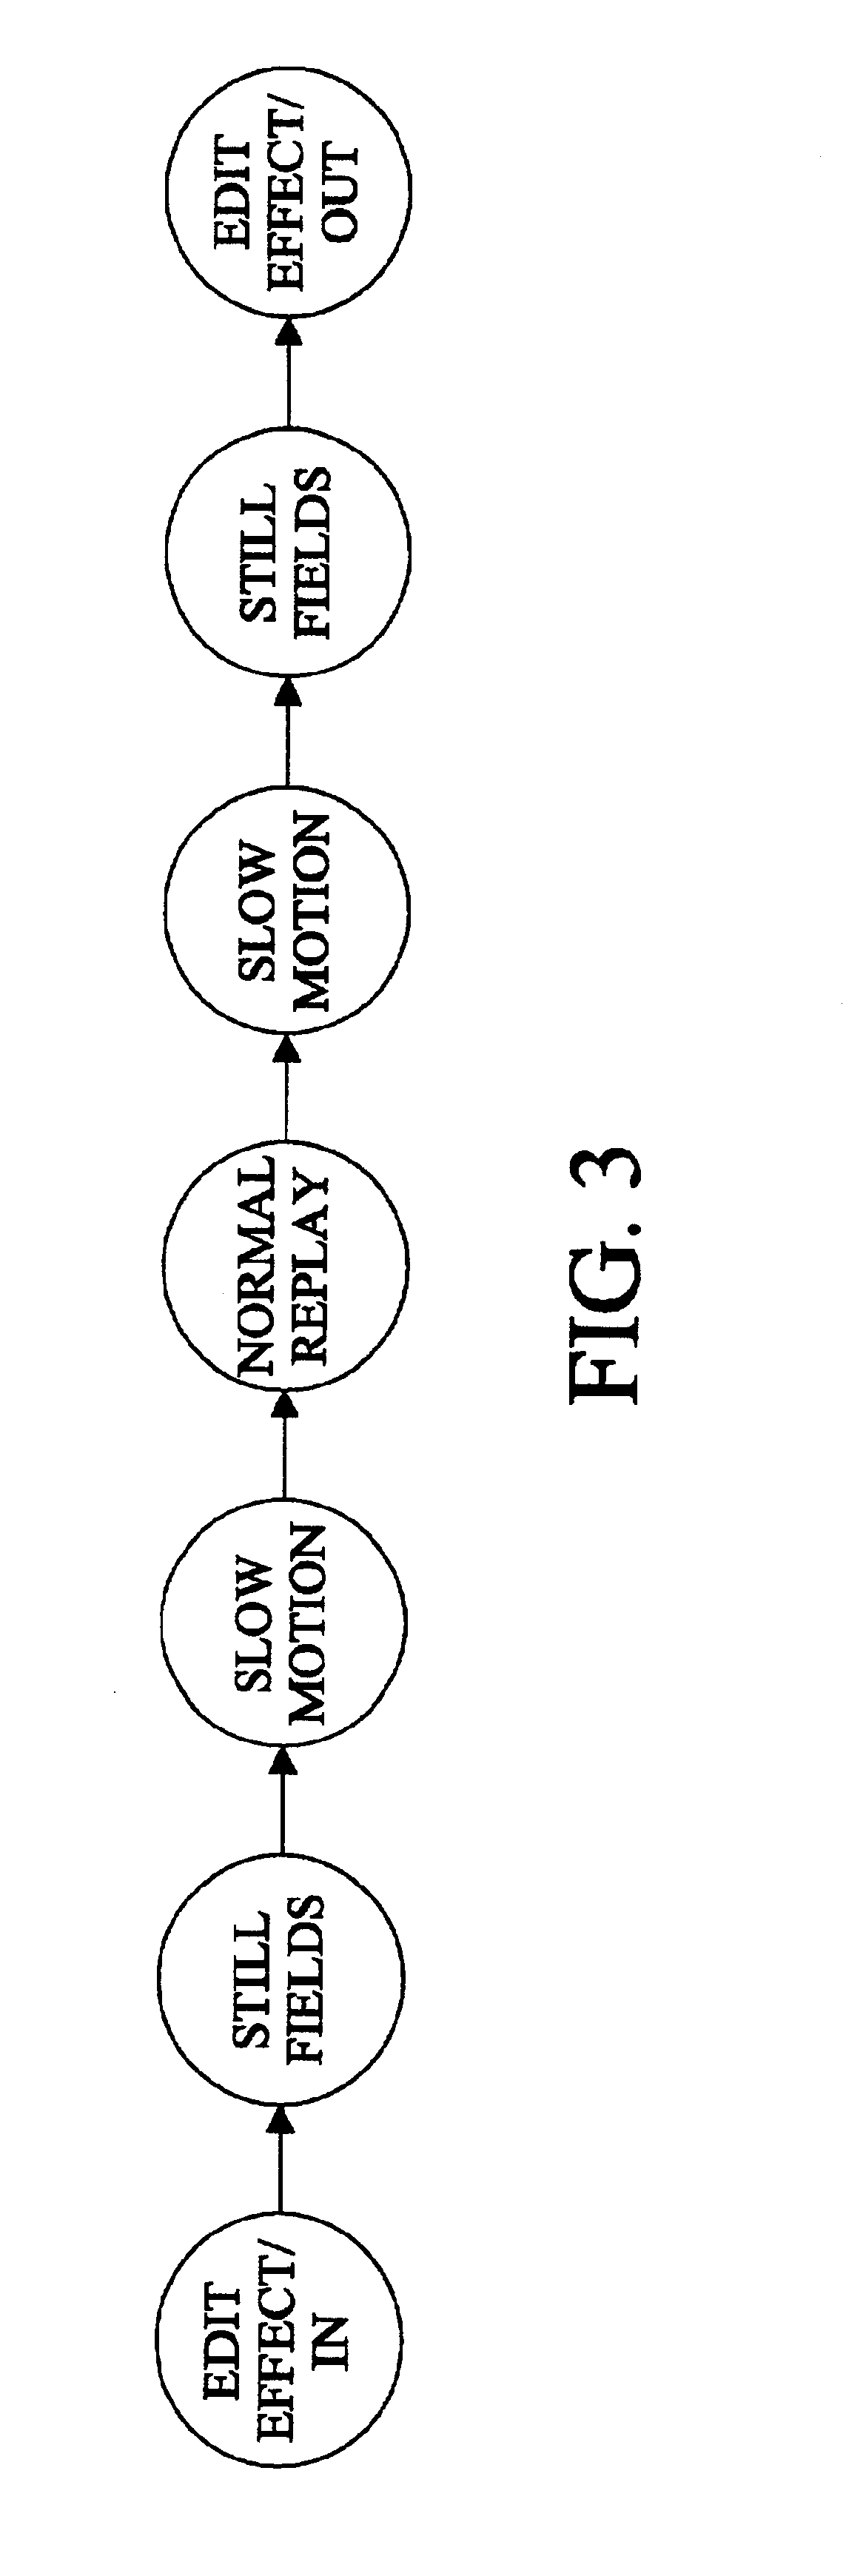 Method for automatic extraction of semantically significant events from video